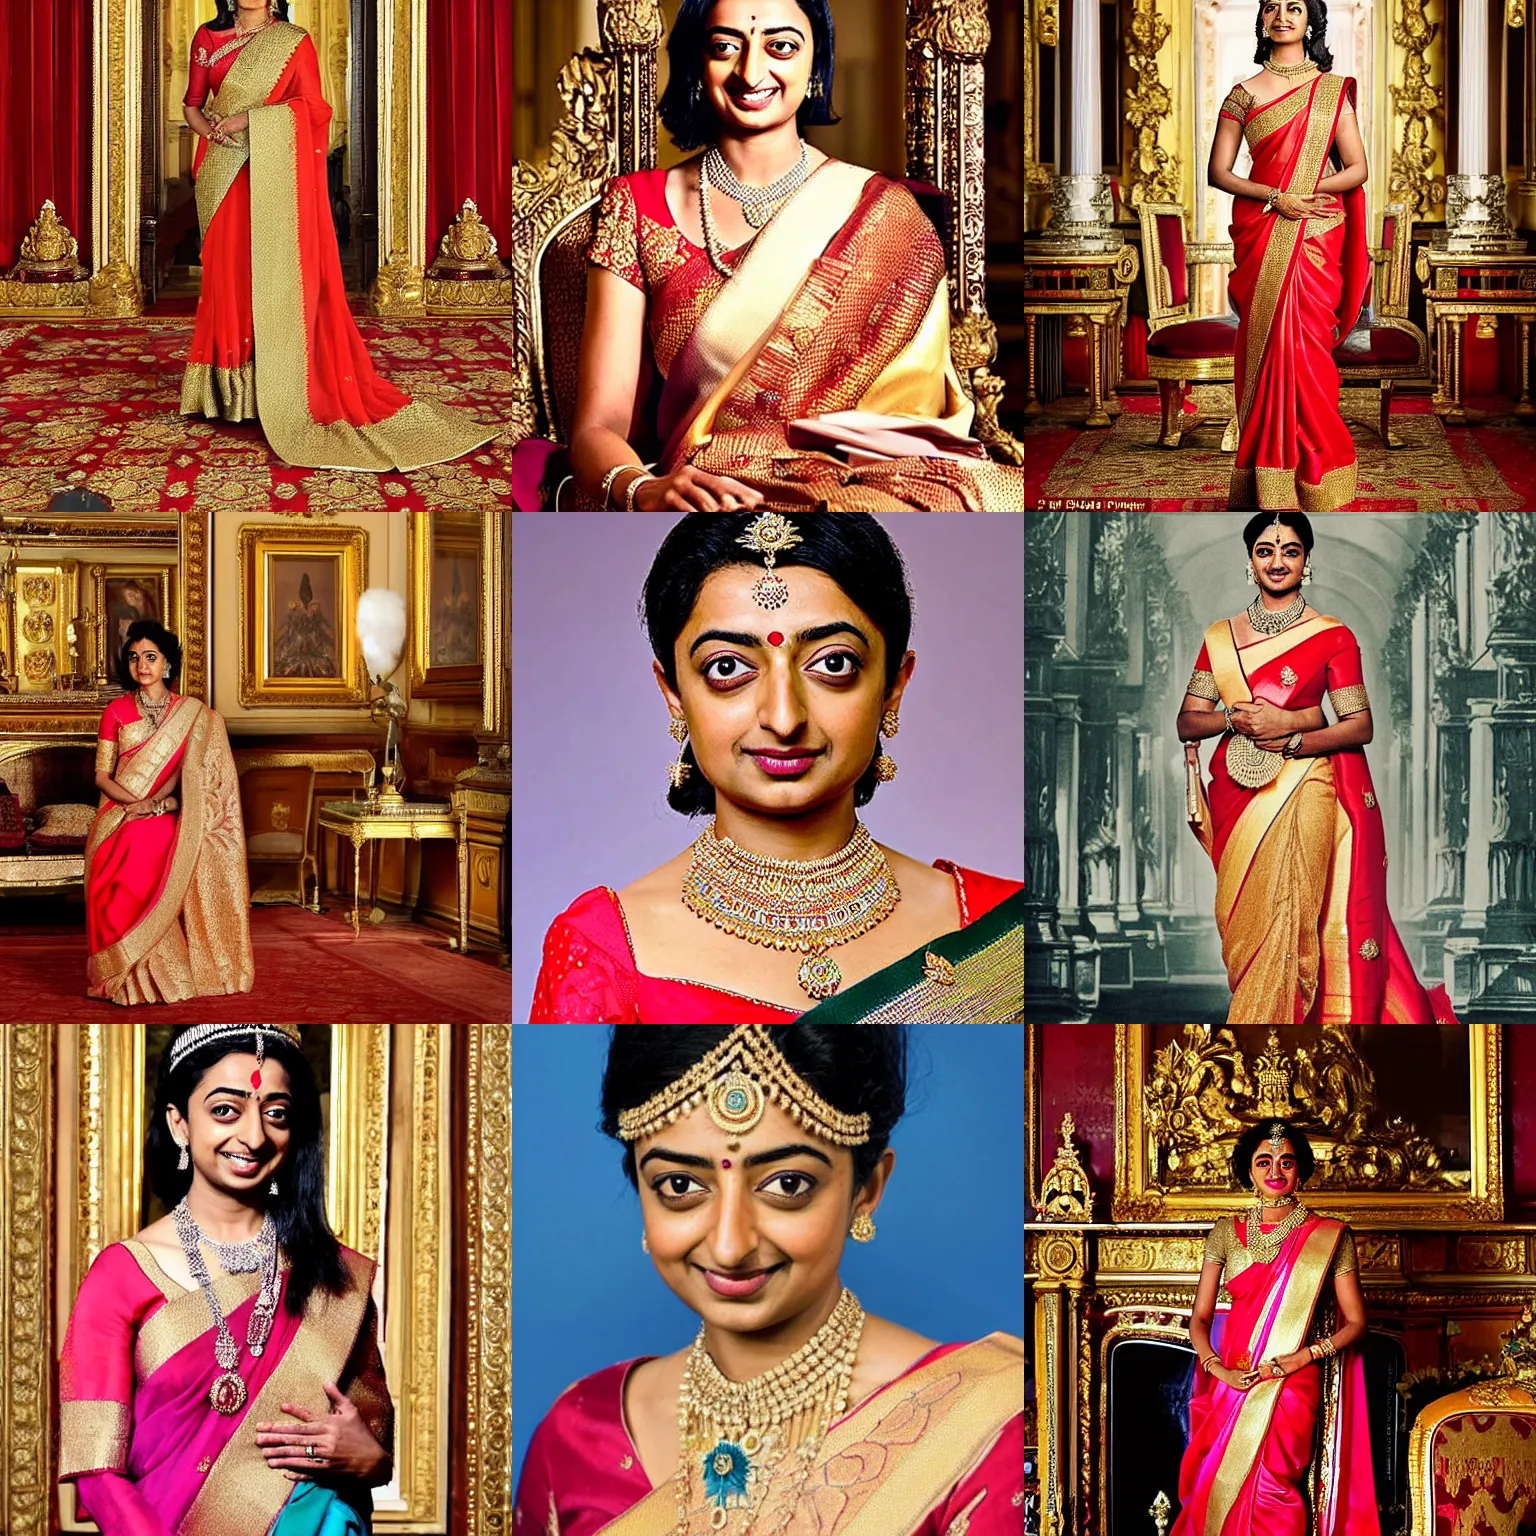 Prompt: Radhika Apte as the Queen of England, wearing an ornate sari, interior of Buckingham Palace, official photo portrait